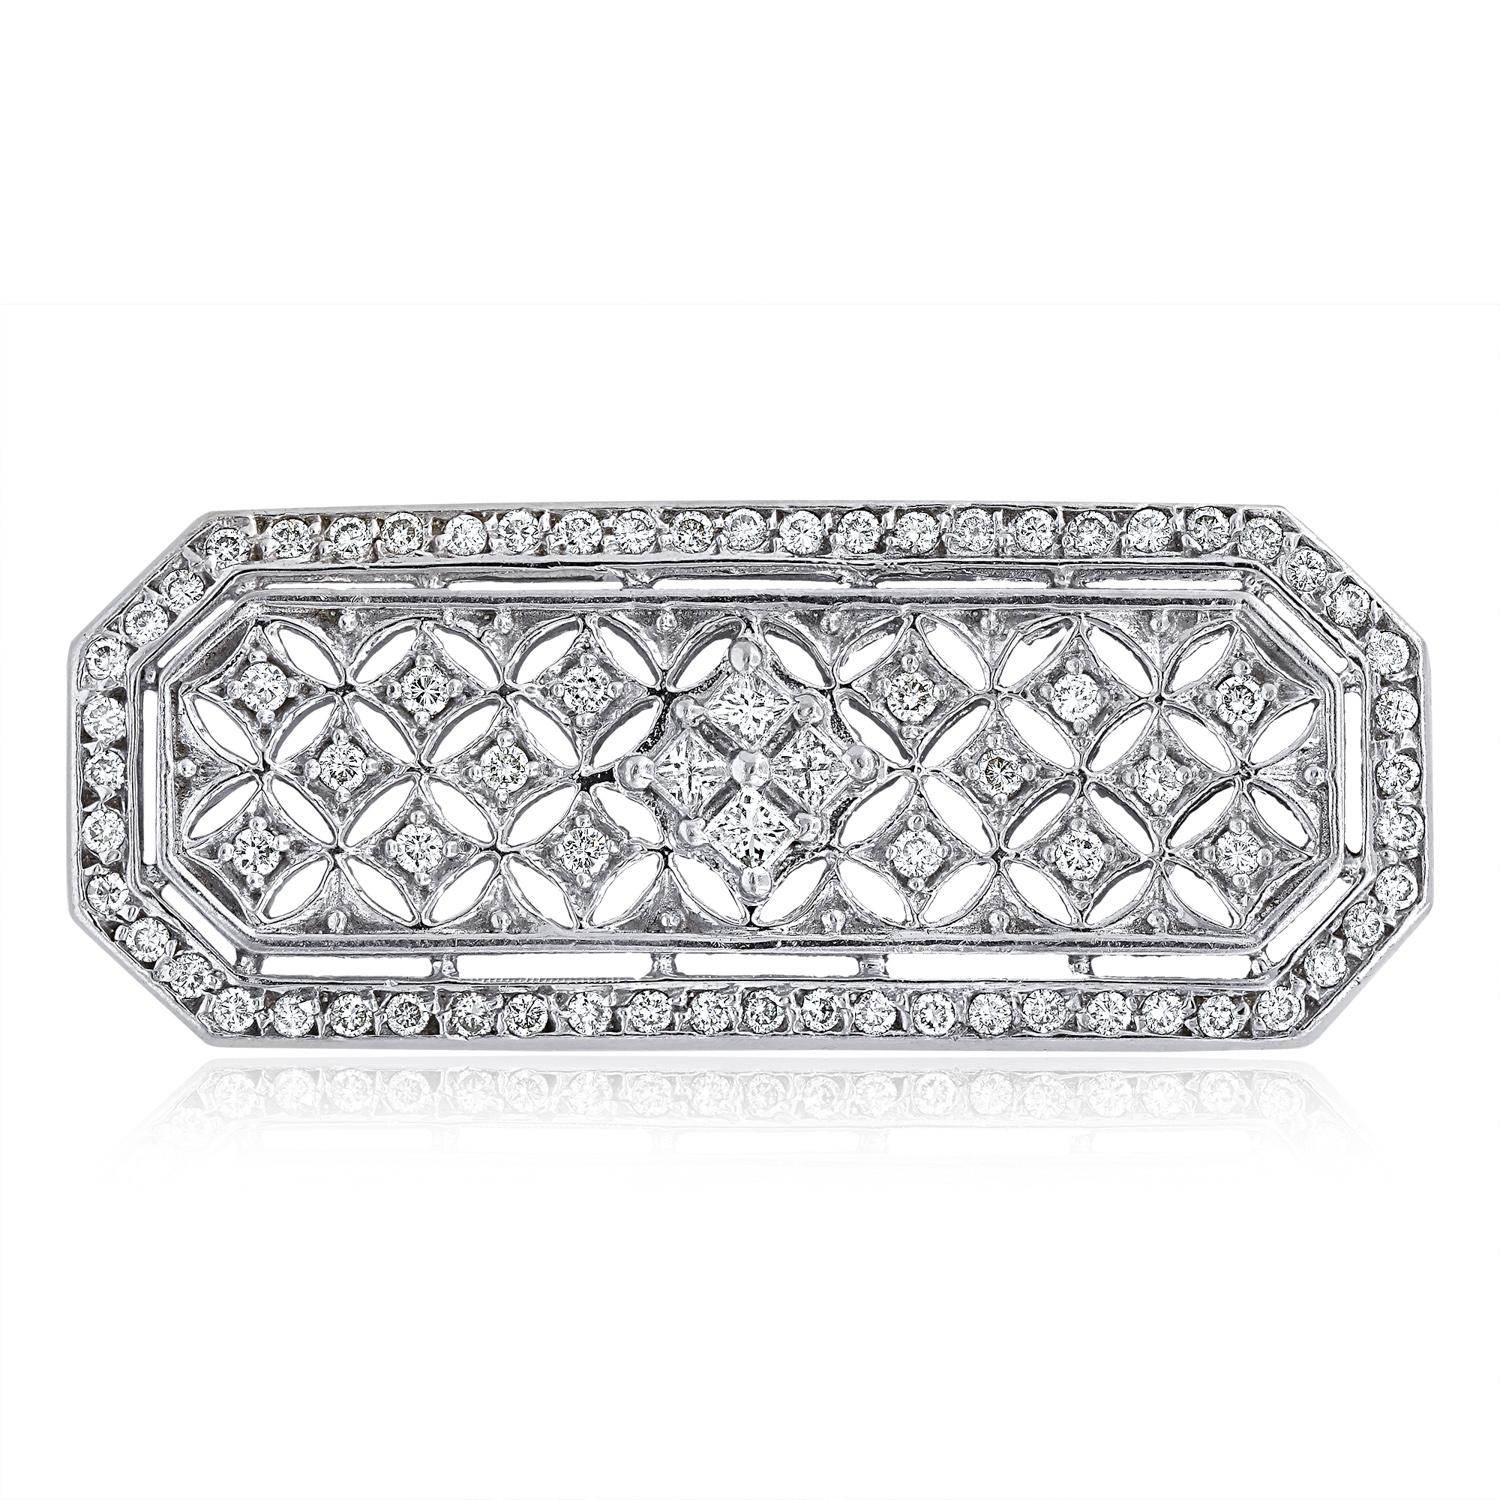 Openwork 14 kt white gold diamond pin/brooch adorned with 1.60 cts tw of diamonds in the middle 
Diana M. is a leading supplier of top-quality fine jewelry for over 35 years.
Diana M is one-stop shop for all your jewelry shopping, carrying line of